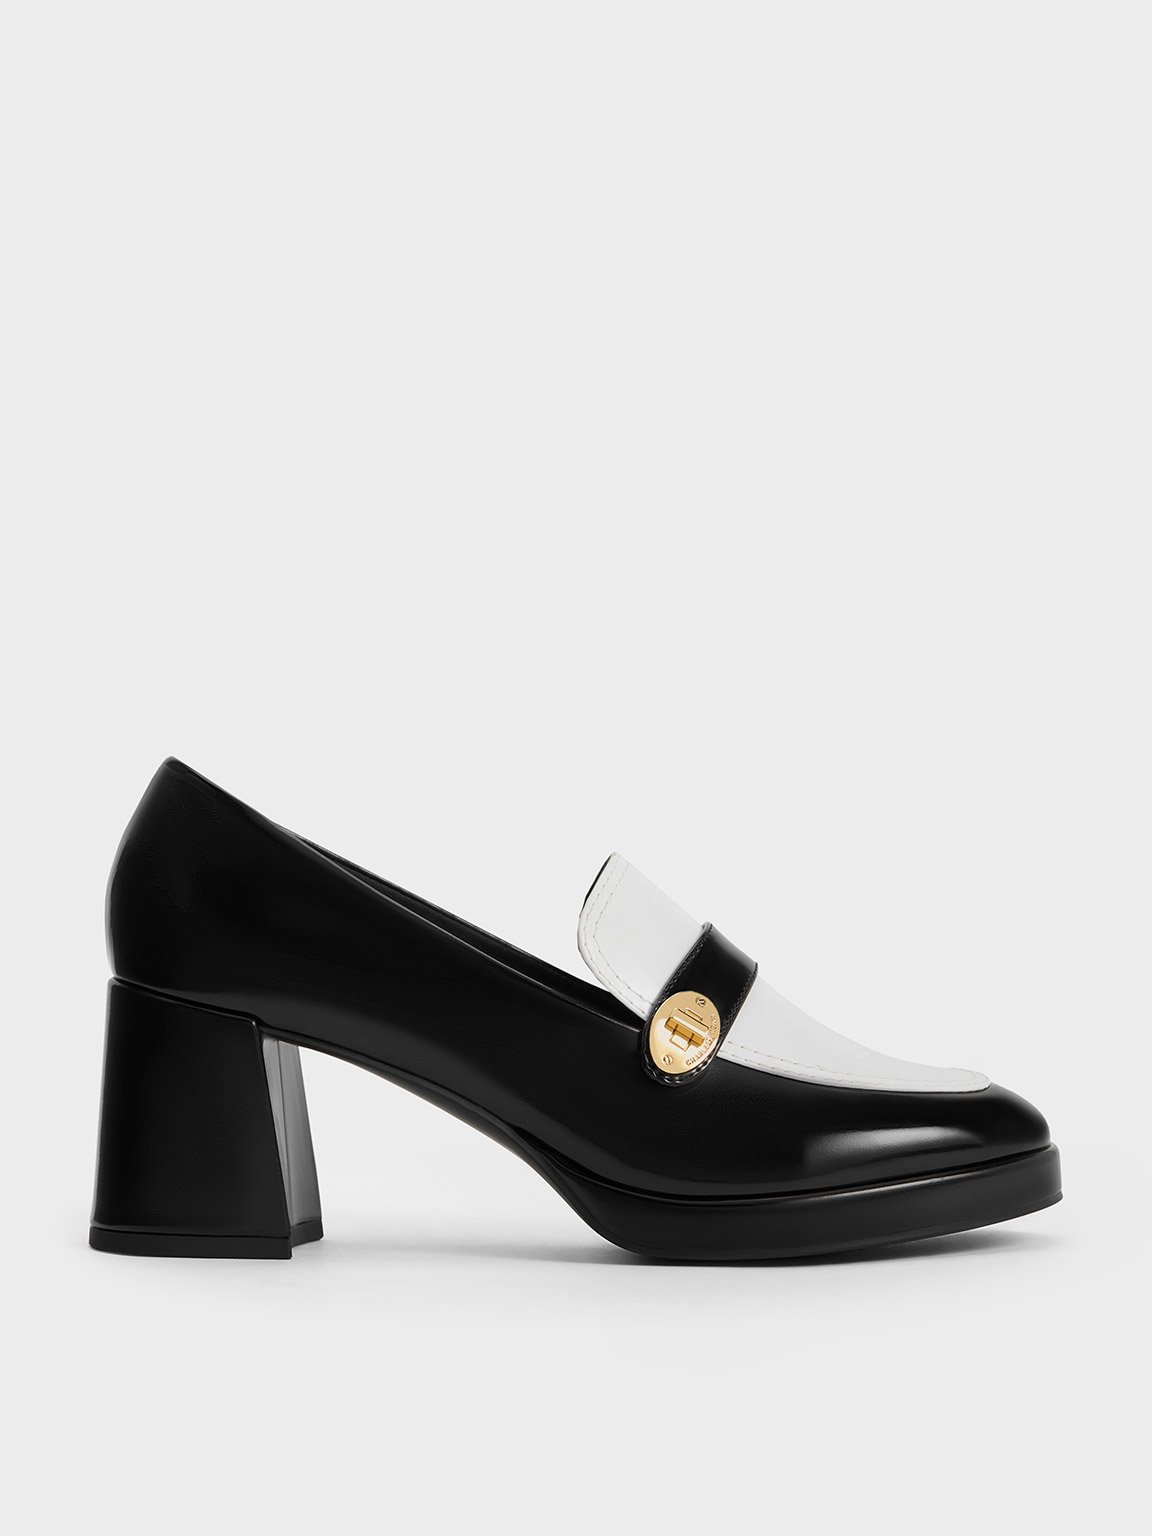 Charles & Keith Two-tone Metallic Accent Loafer Pumps In Multi